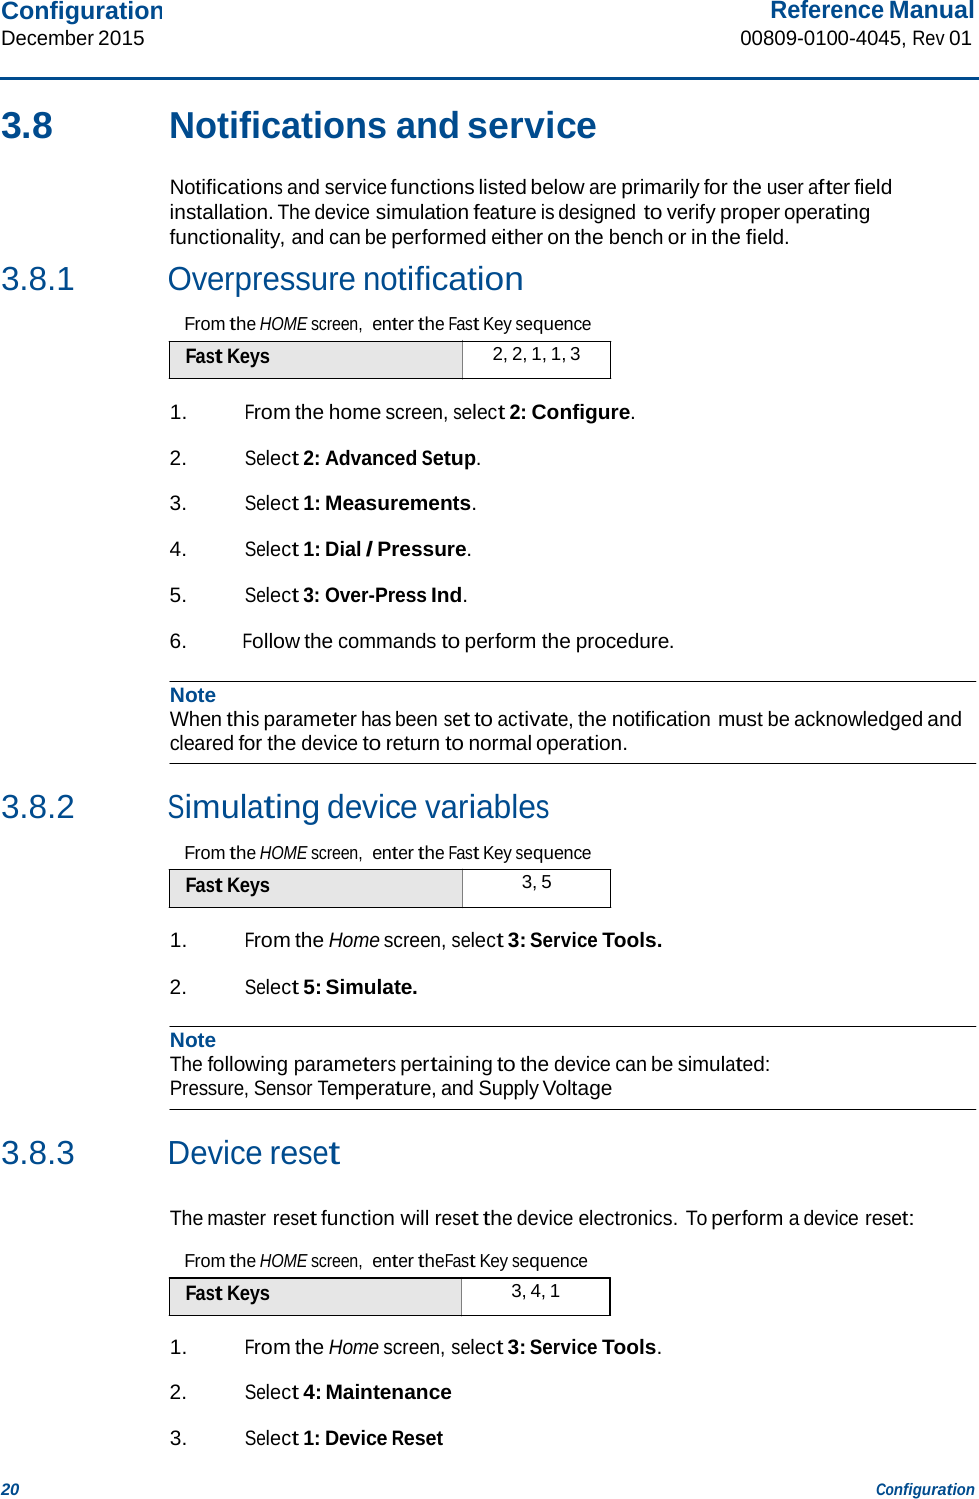 Configuration December 2015 Reference Manual 00809-0100-4045, Rev 01 20 Configuration    3.8  Notifications and service  Notifications and service functions listed below are primarily for the user after field installation. The device simulation feature is designed to verify proper operating functionality, and can be performed either on the bench or in the field. 3.8.1 Overpressure notification  From the HOME screen,  enter the Fast Key sequence Fast Keys  2, 2, 1, 1, 3  1. From the home screen, select 2: Configure.  2. Select 2: Advanced Setup.  3. Select 1: Measurements.  4. Select 1: Dial / Pressure.  5. Select 3: Over-Press Ind.  6. Follow the commands to perform the procedure.  Note When this parameter has been set to activate, the notification must be acknowledged and cleared for the device to return to normal operation.   3.8.2 Simulating device variables  From the HOME screen,  enter the Fast Key sequence Fast Keys  3, 5  1. From the Home screen, select 3: Service Tools.  2. Select 5: Simulate.  Note The following parameters pertaining to the device can be simulated: Pressure, Sensor Temperature, and Supply Voltage   3.8.3 Device reset   The master reset function will reset the device electronics. To perform a device reset:  From the HOME screen,  enter theFast Key sequence Fast Keys  3, 4, 1  1. From the Home screen, select 3: Service Tools.  2. Select 4: Maintenance  3. Select 1: Device Reset 